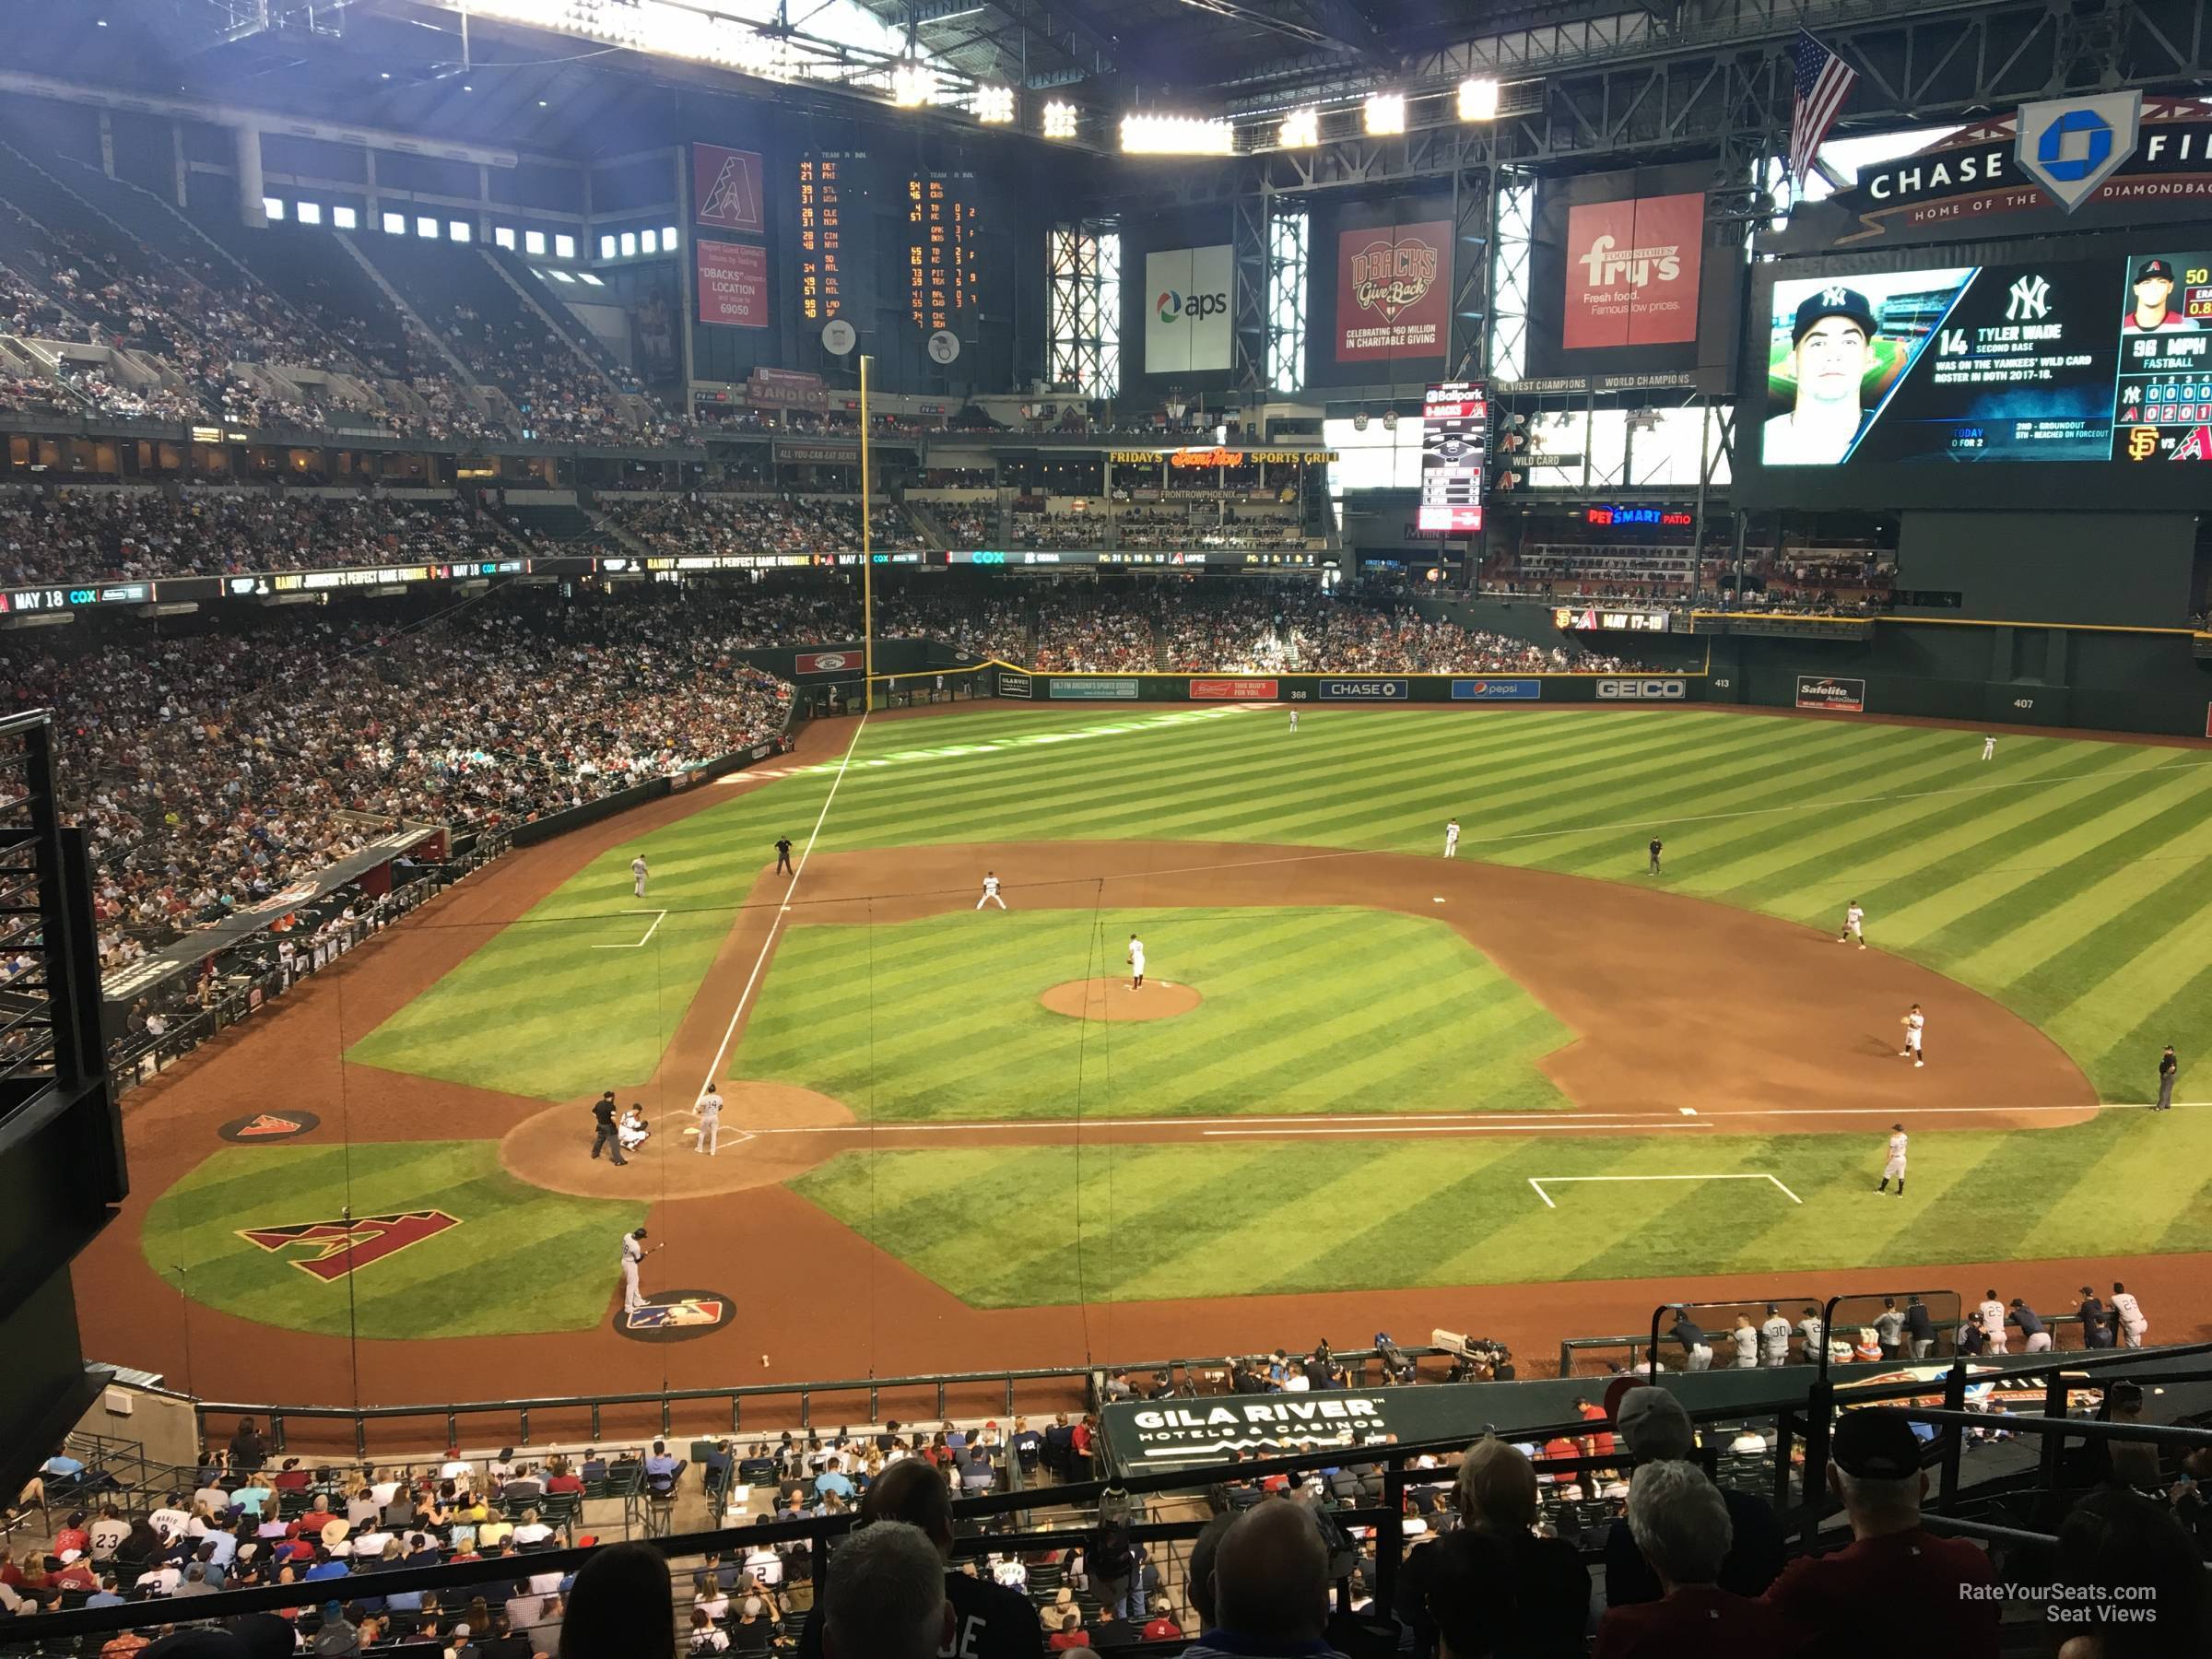 section 210a, row 1 seat view  for baseball - chase field